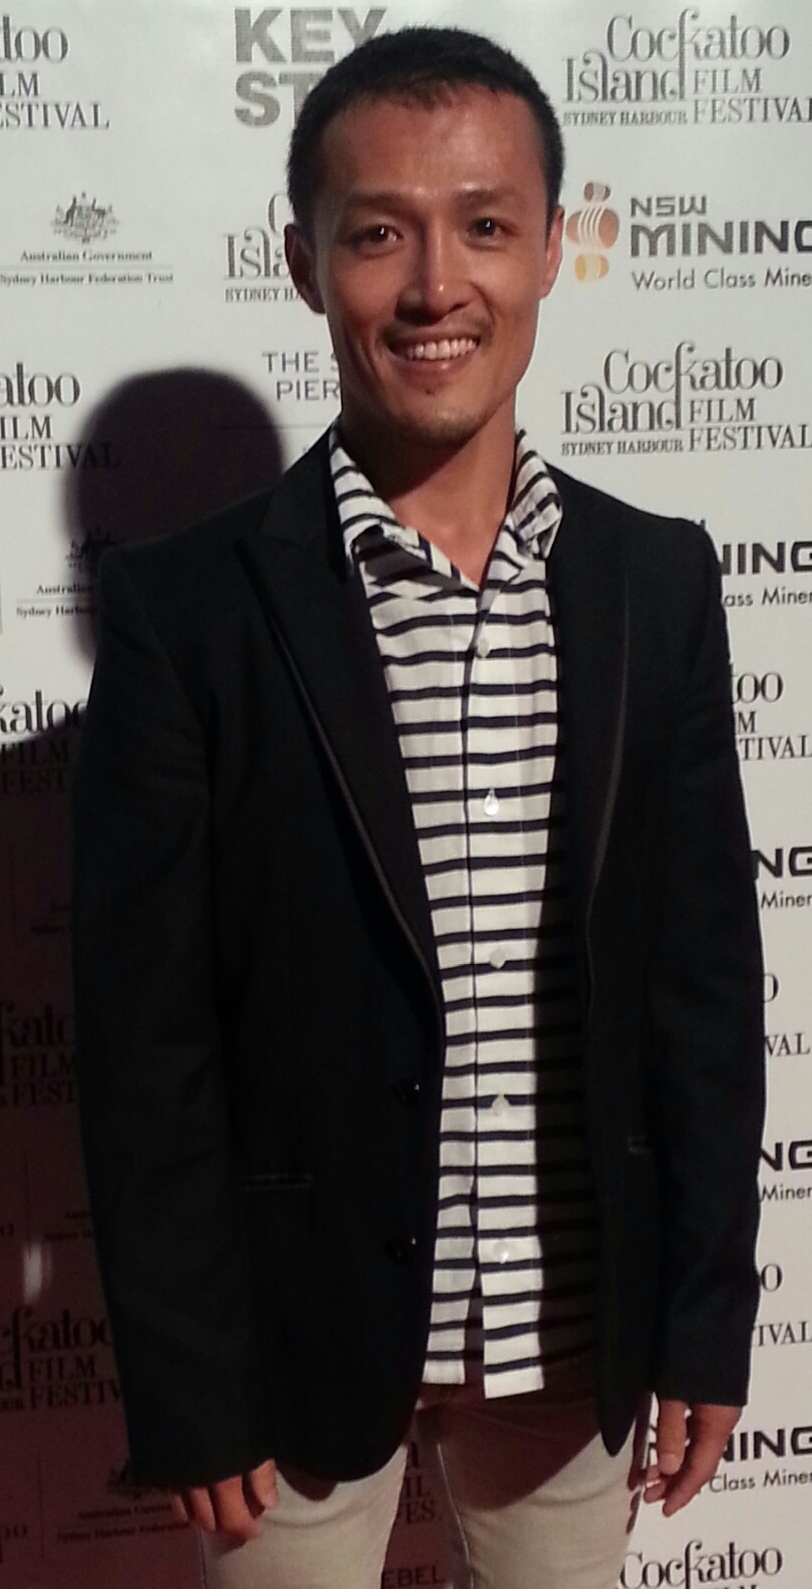 Khanh on the red carpet, Cockatoo Island Film Festival premiere 24/10/12